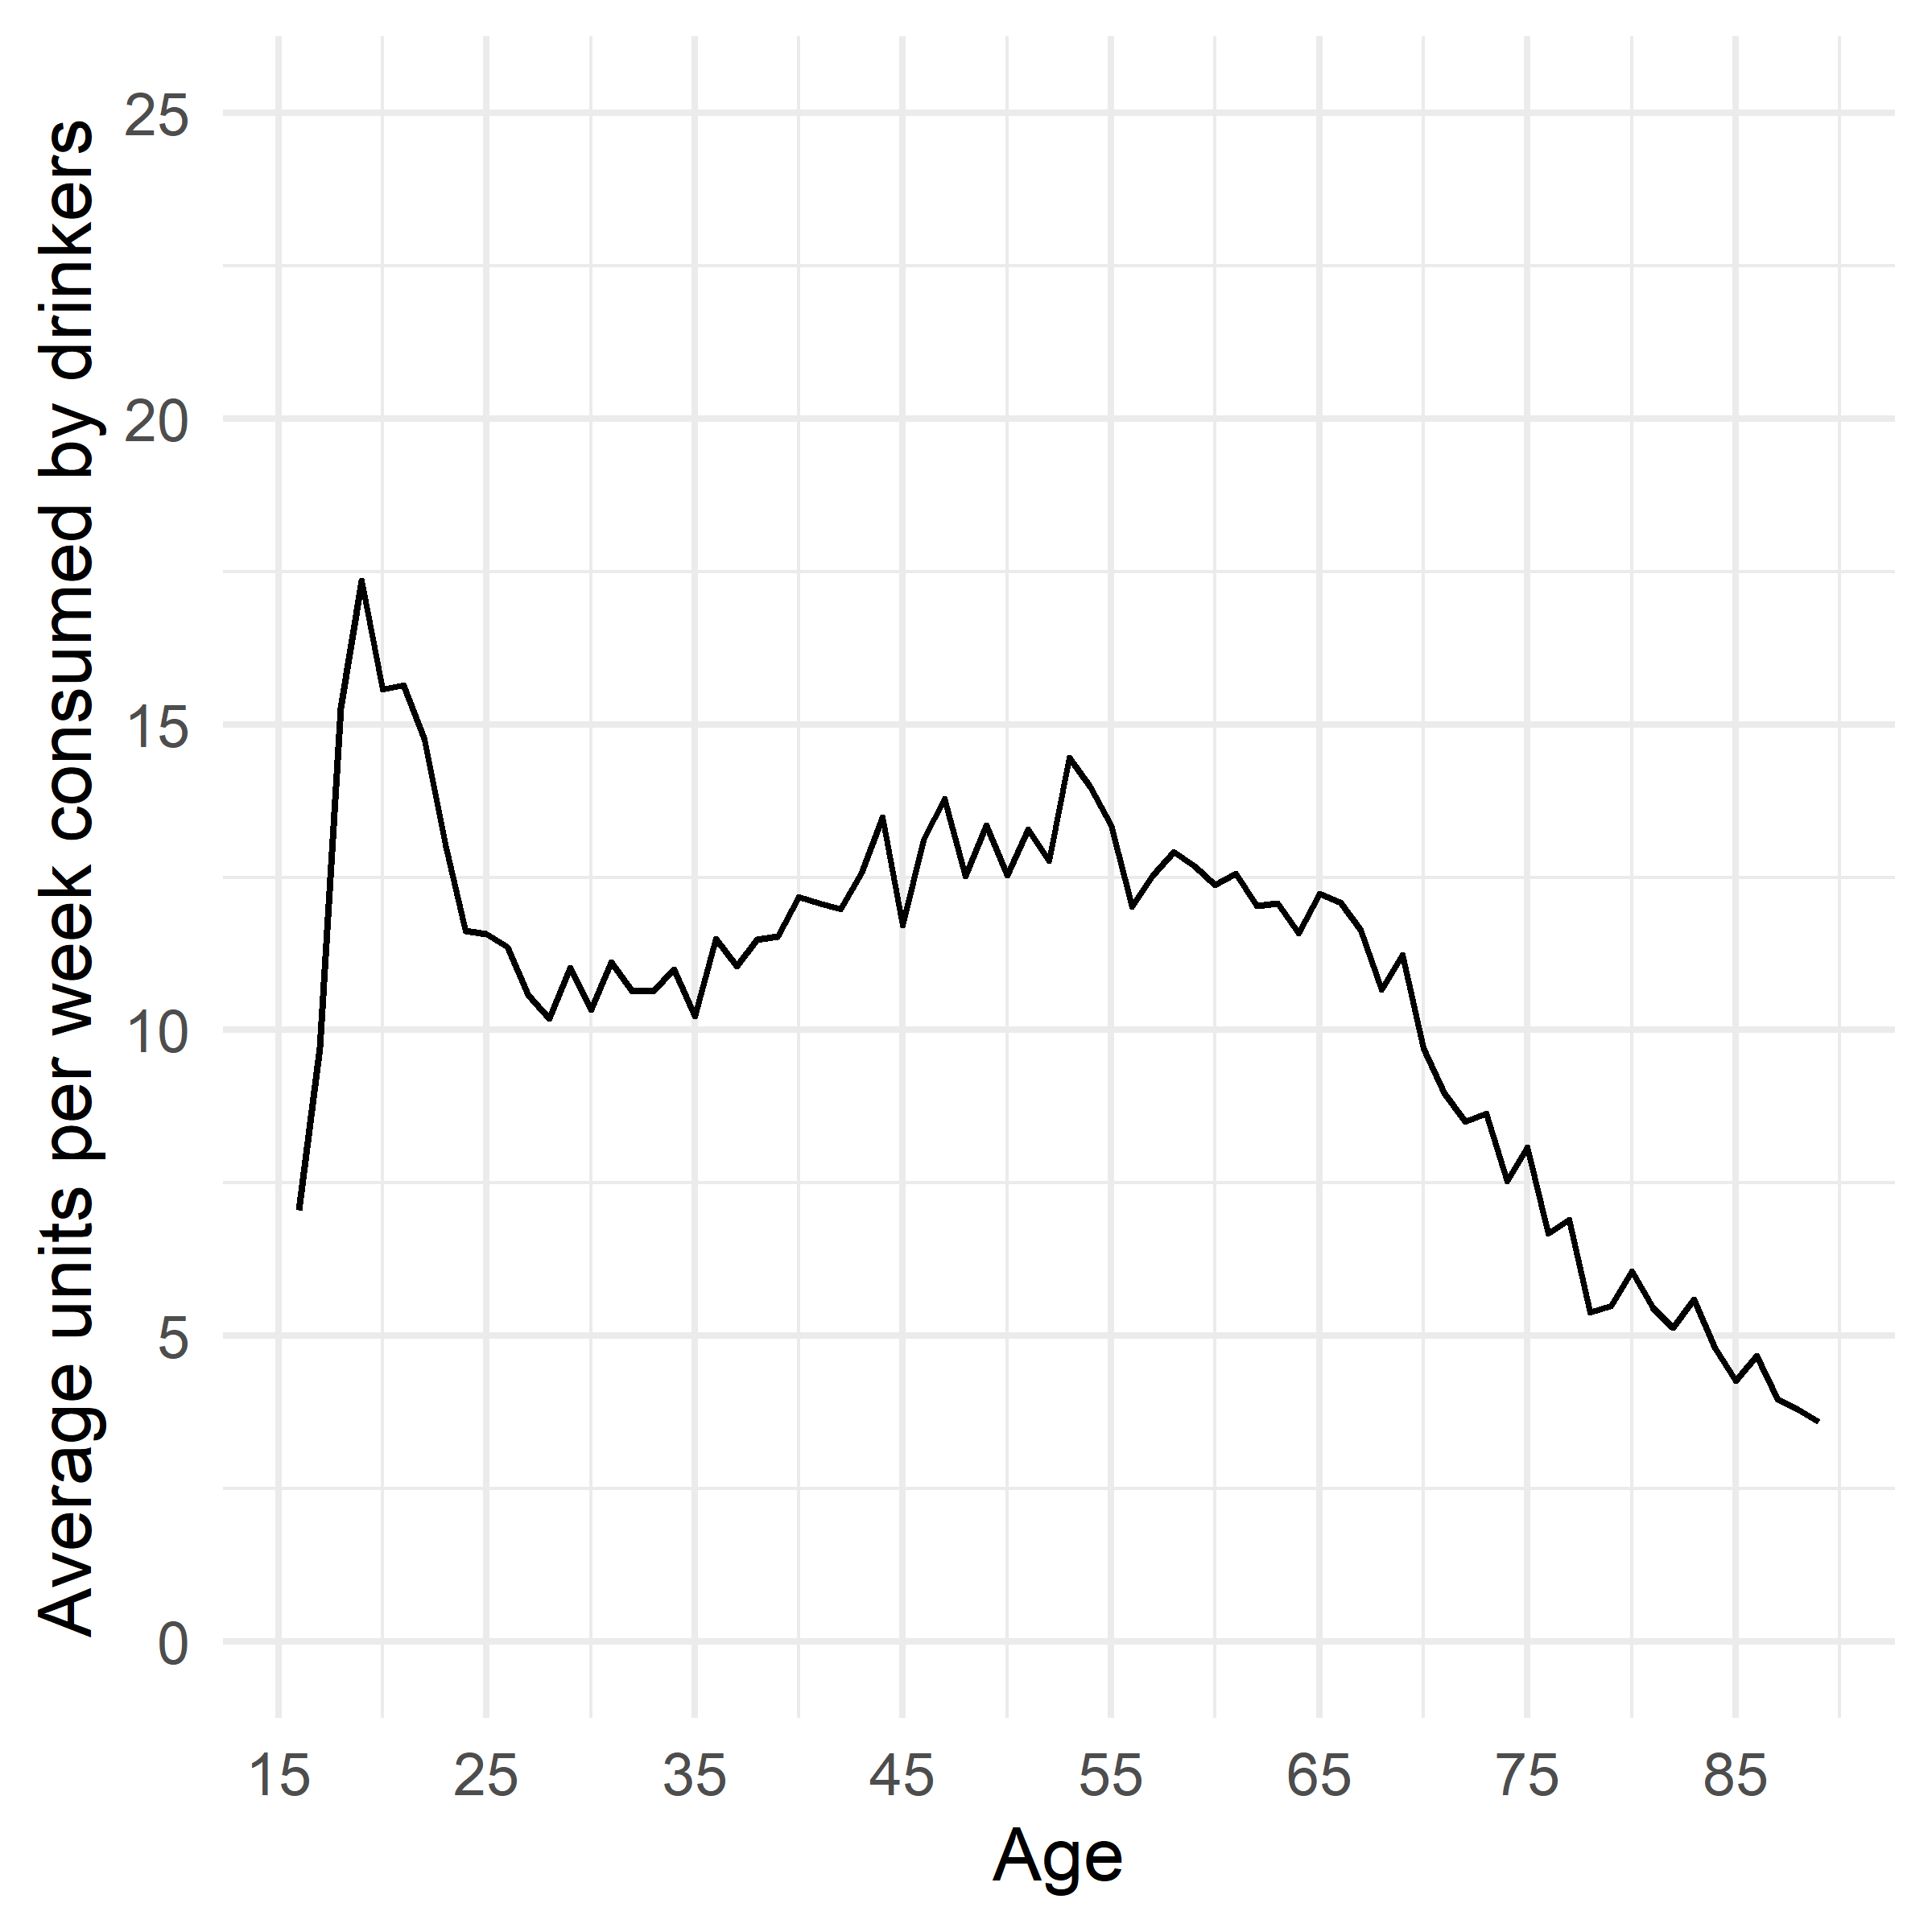 Figure 14. Age trends in the average amount drunk per week by people who drink alcohol.